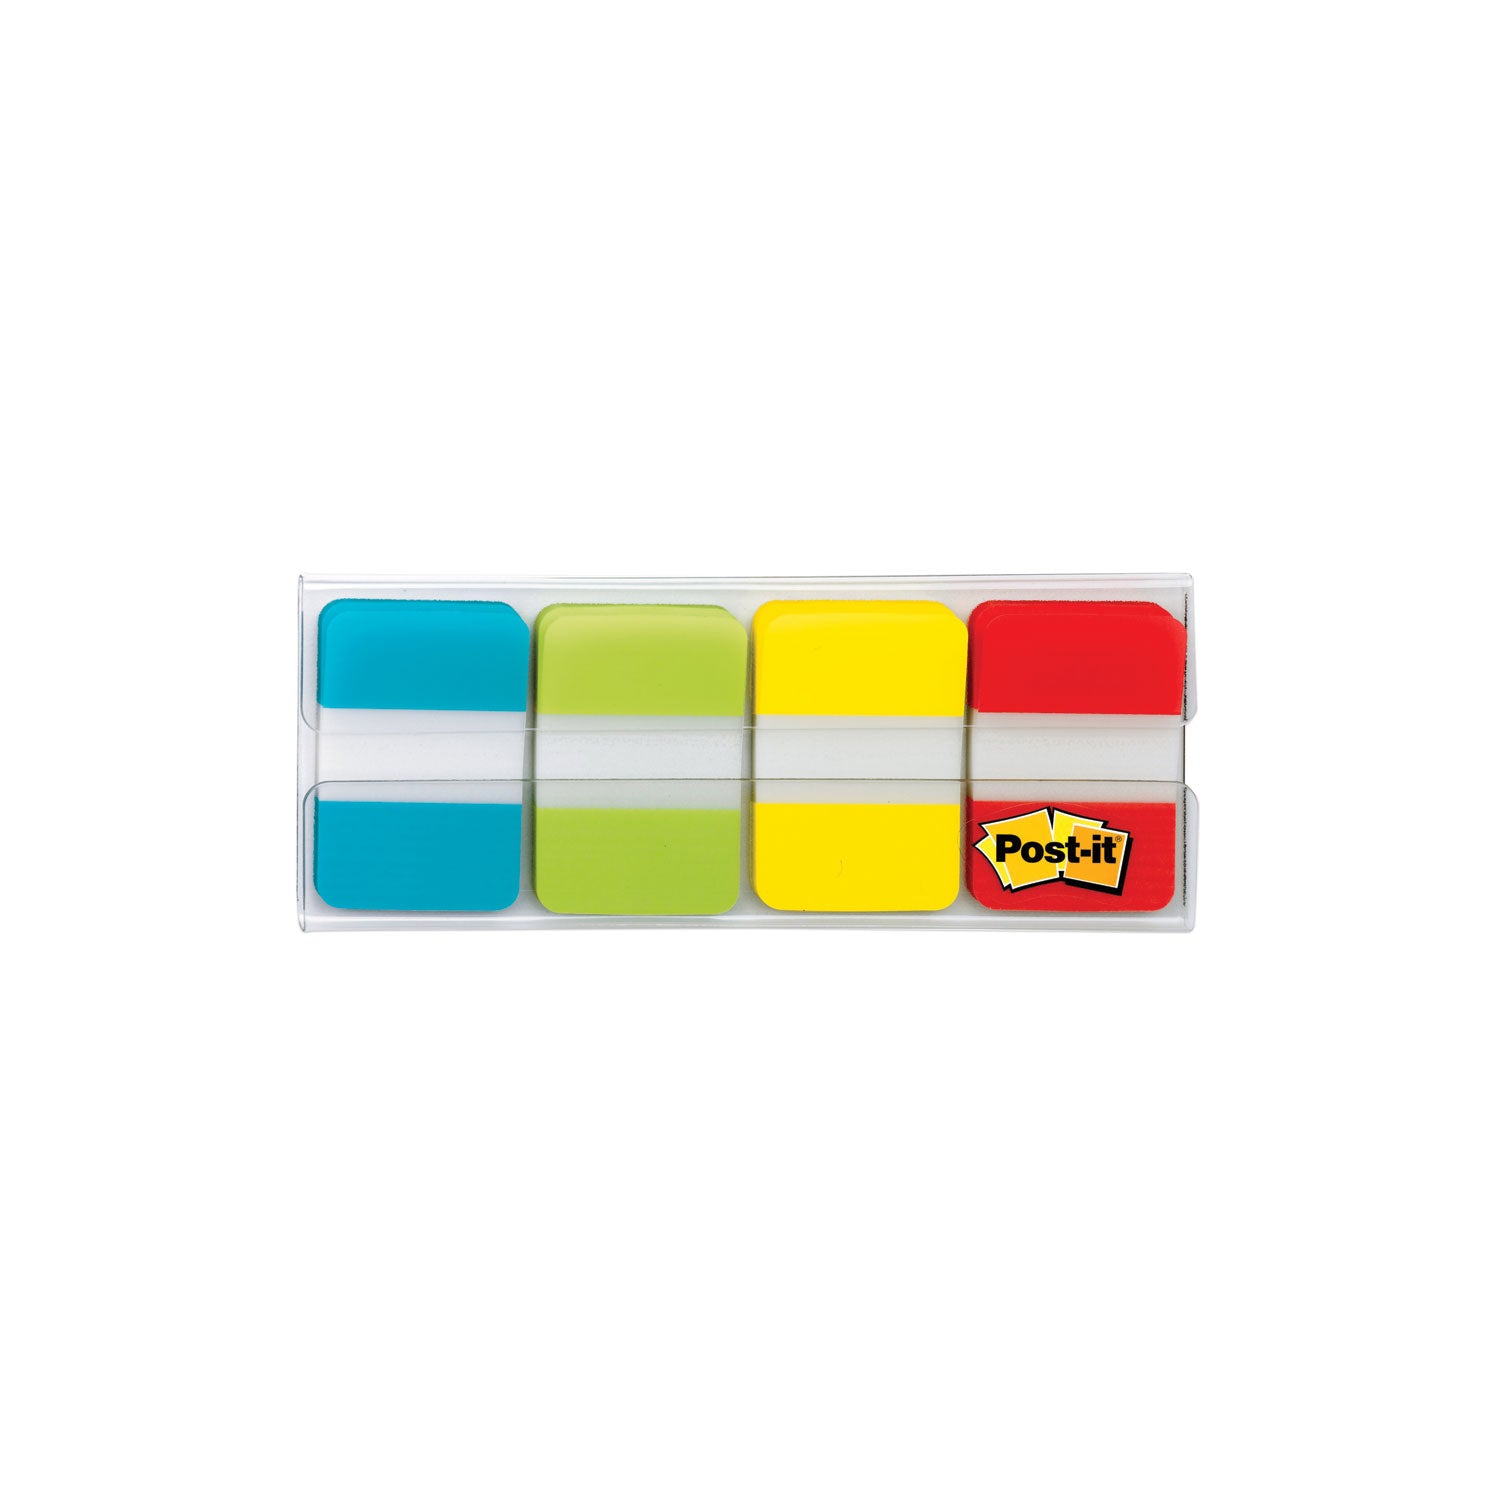 1-wide-tabs-with-dispenser-aqua-lime-red-yellow-88-pack_mmm70005179232 - 5